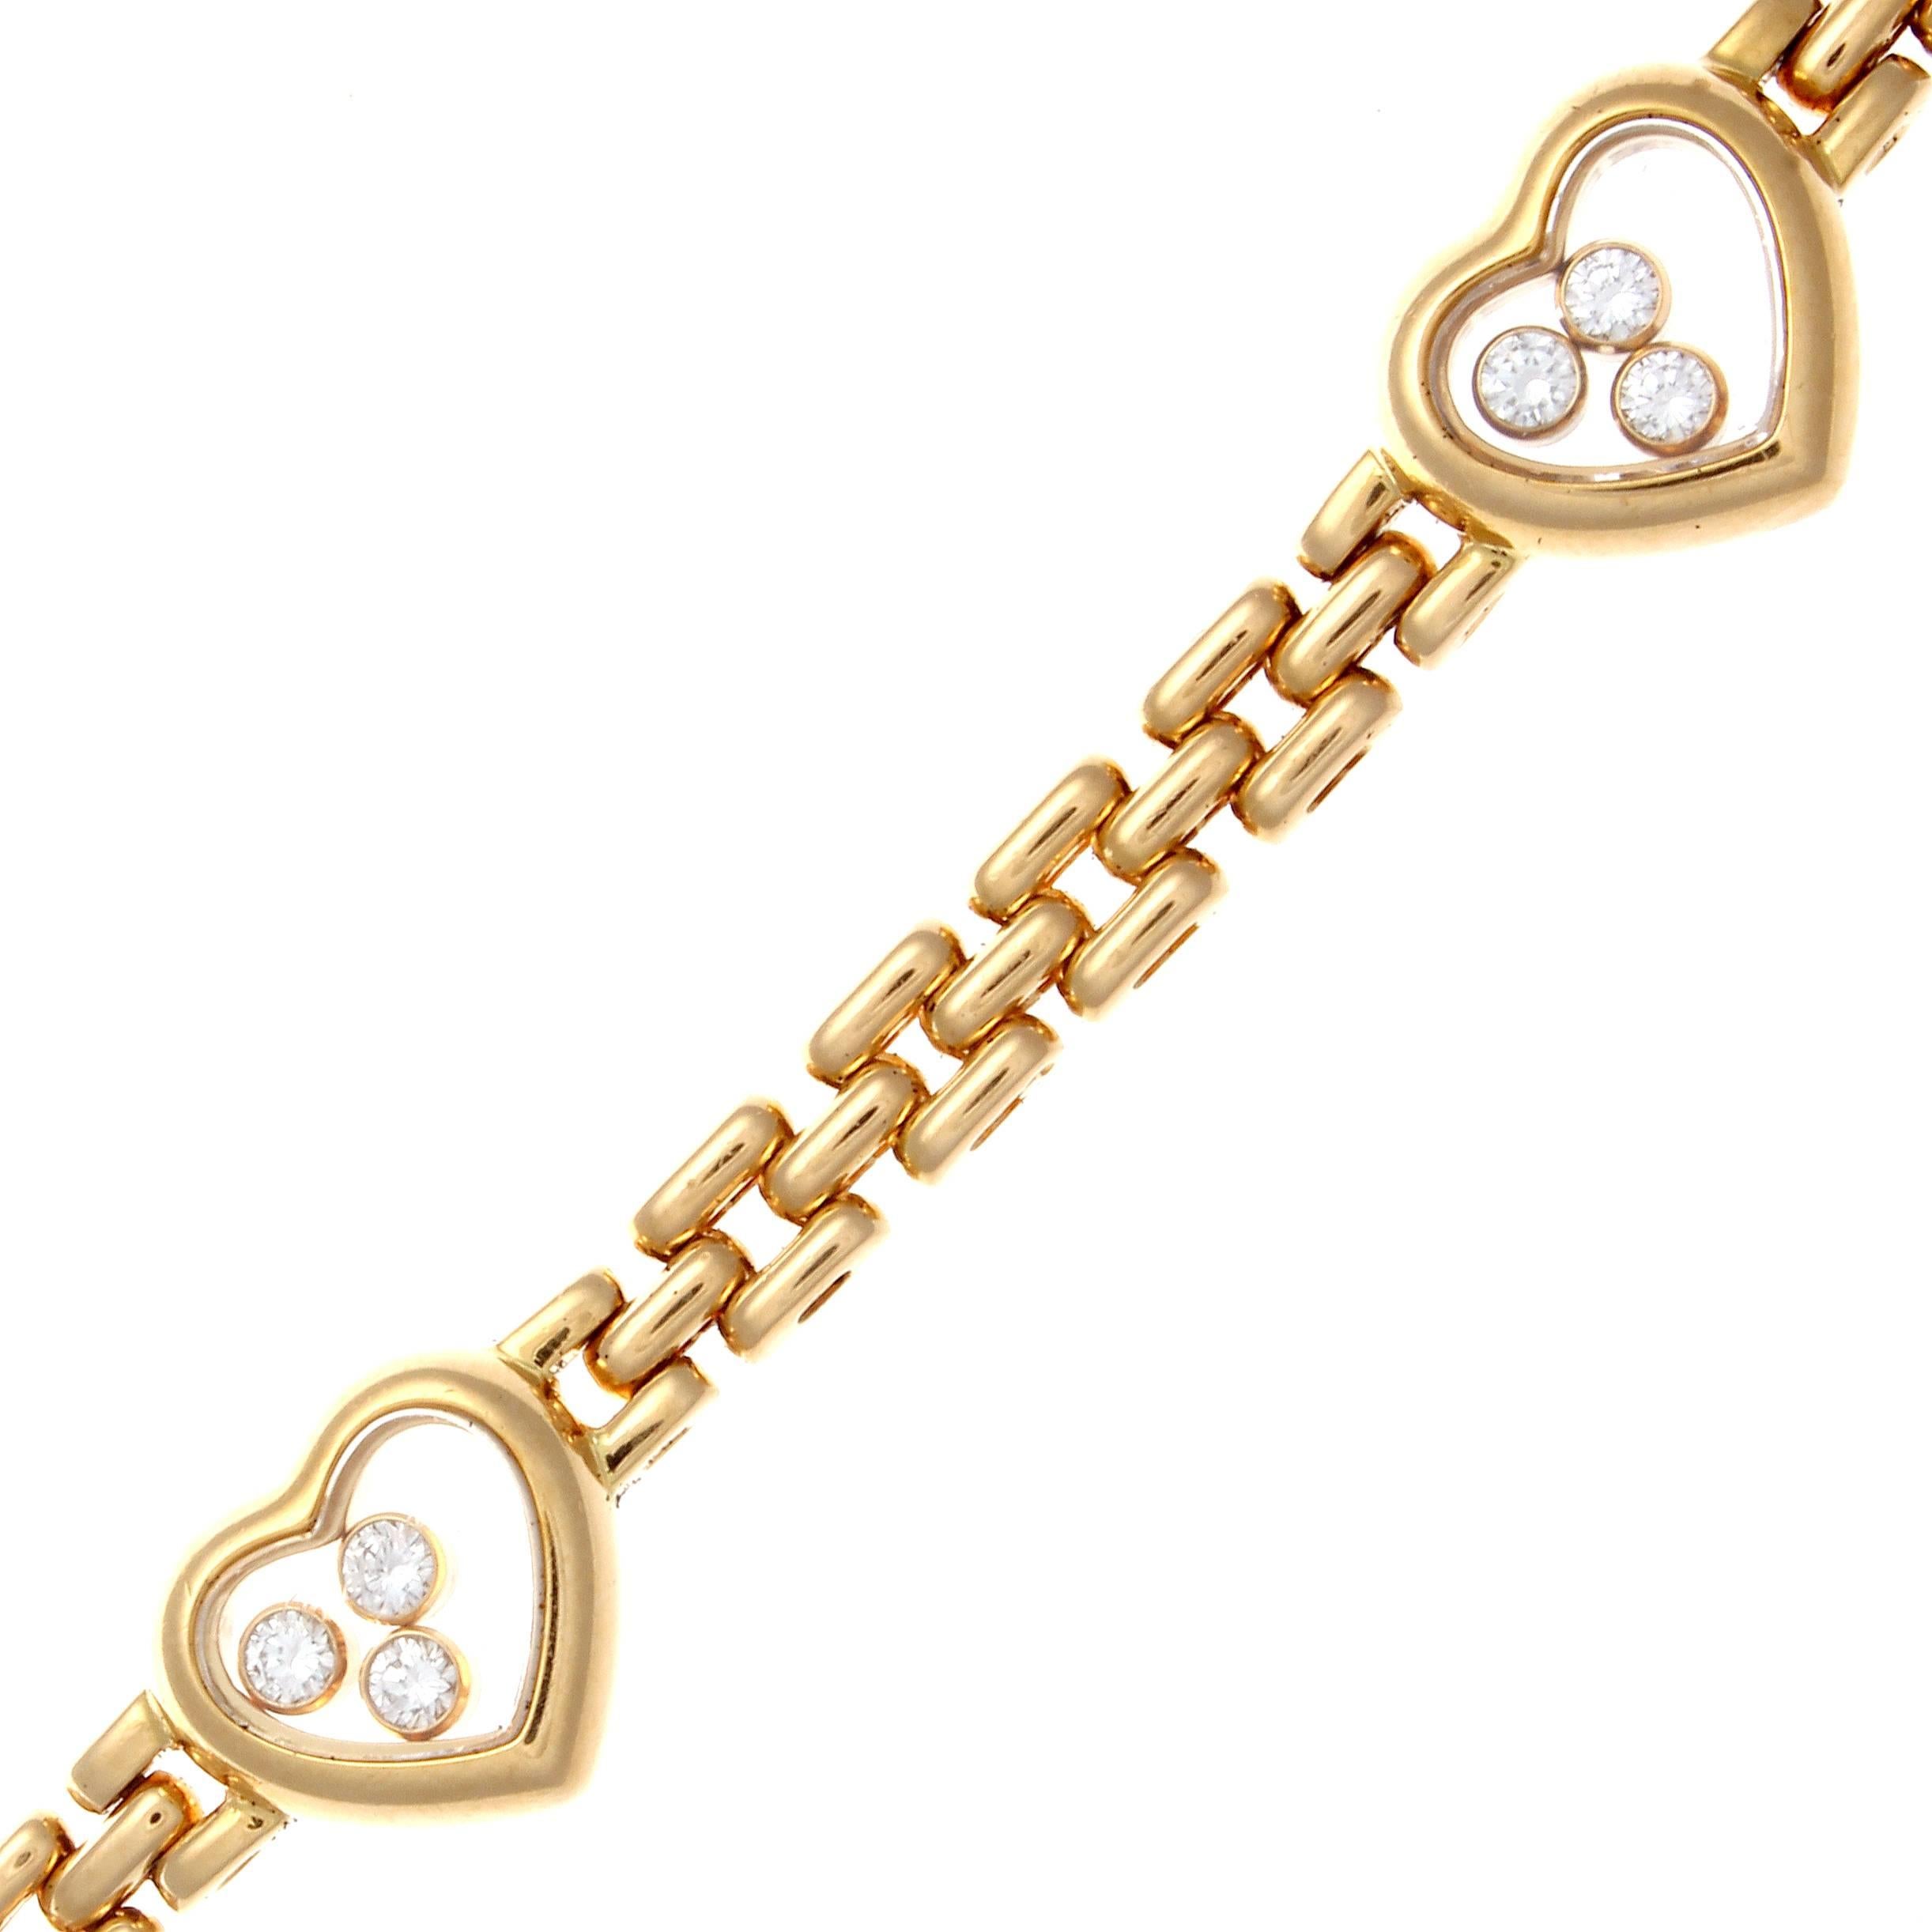 A love filled creation from the happy collection at Chopard. Designed with transparent hearts filled with joy from 3 lively white, clean diamonds in each motif. Crafted in glistening 18k yellow gold. Signed Chopard and numbered.